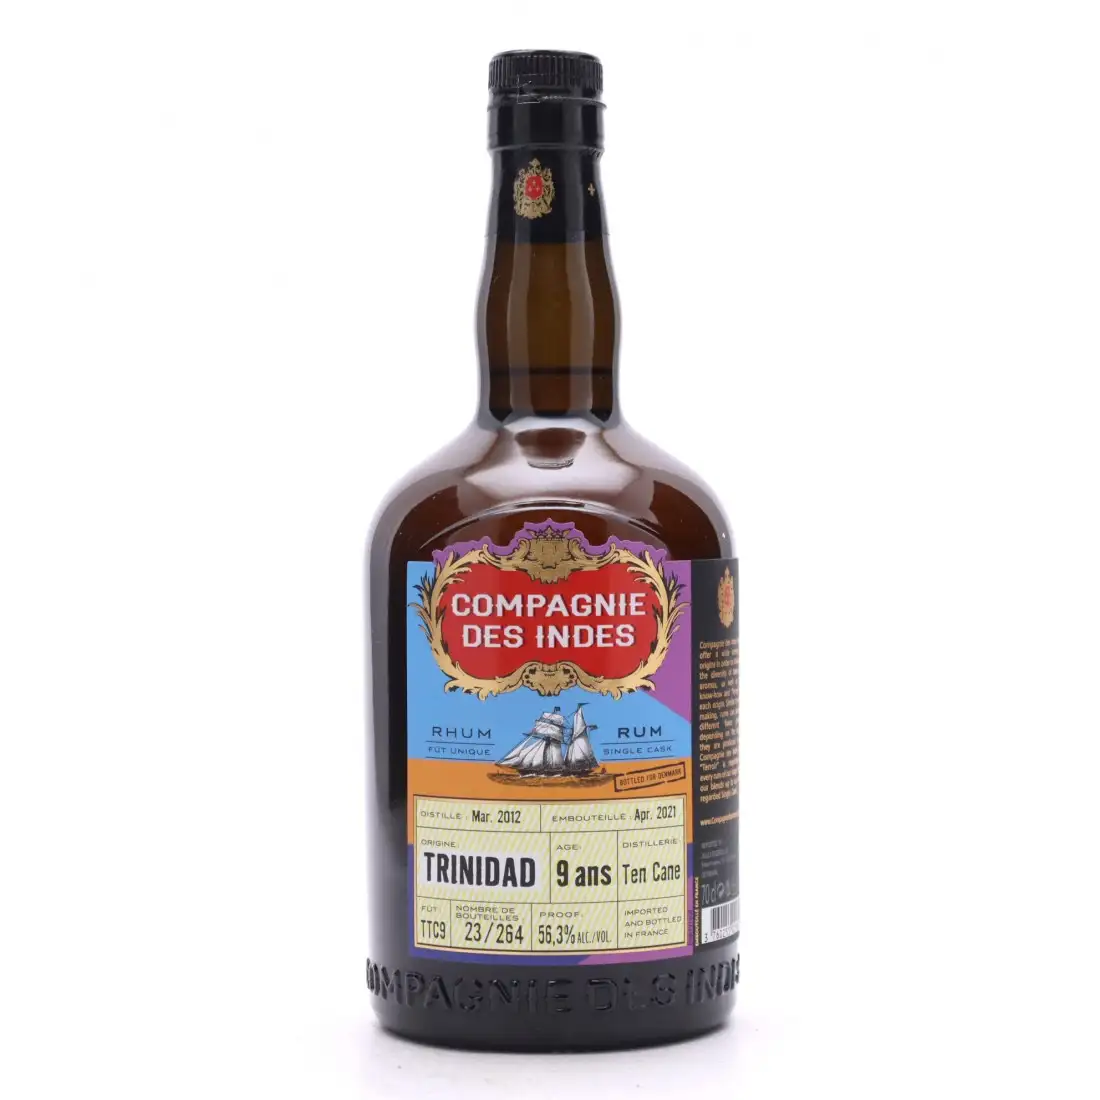 Image of the front of the bottle of the rum Trinidad (Bottled for Denmark)